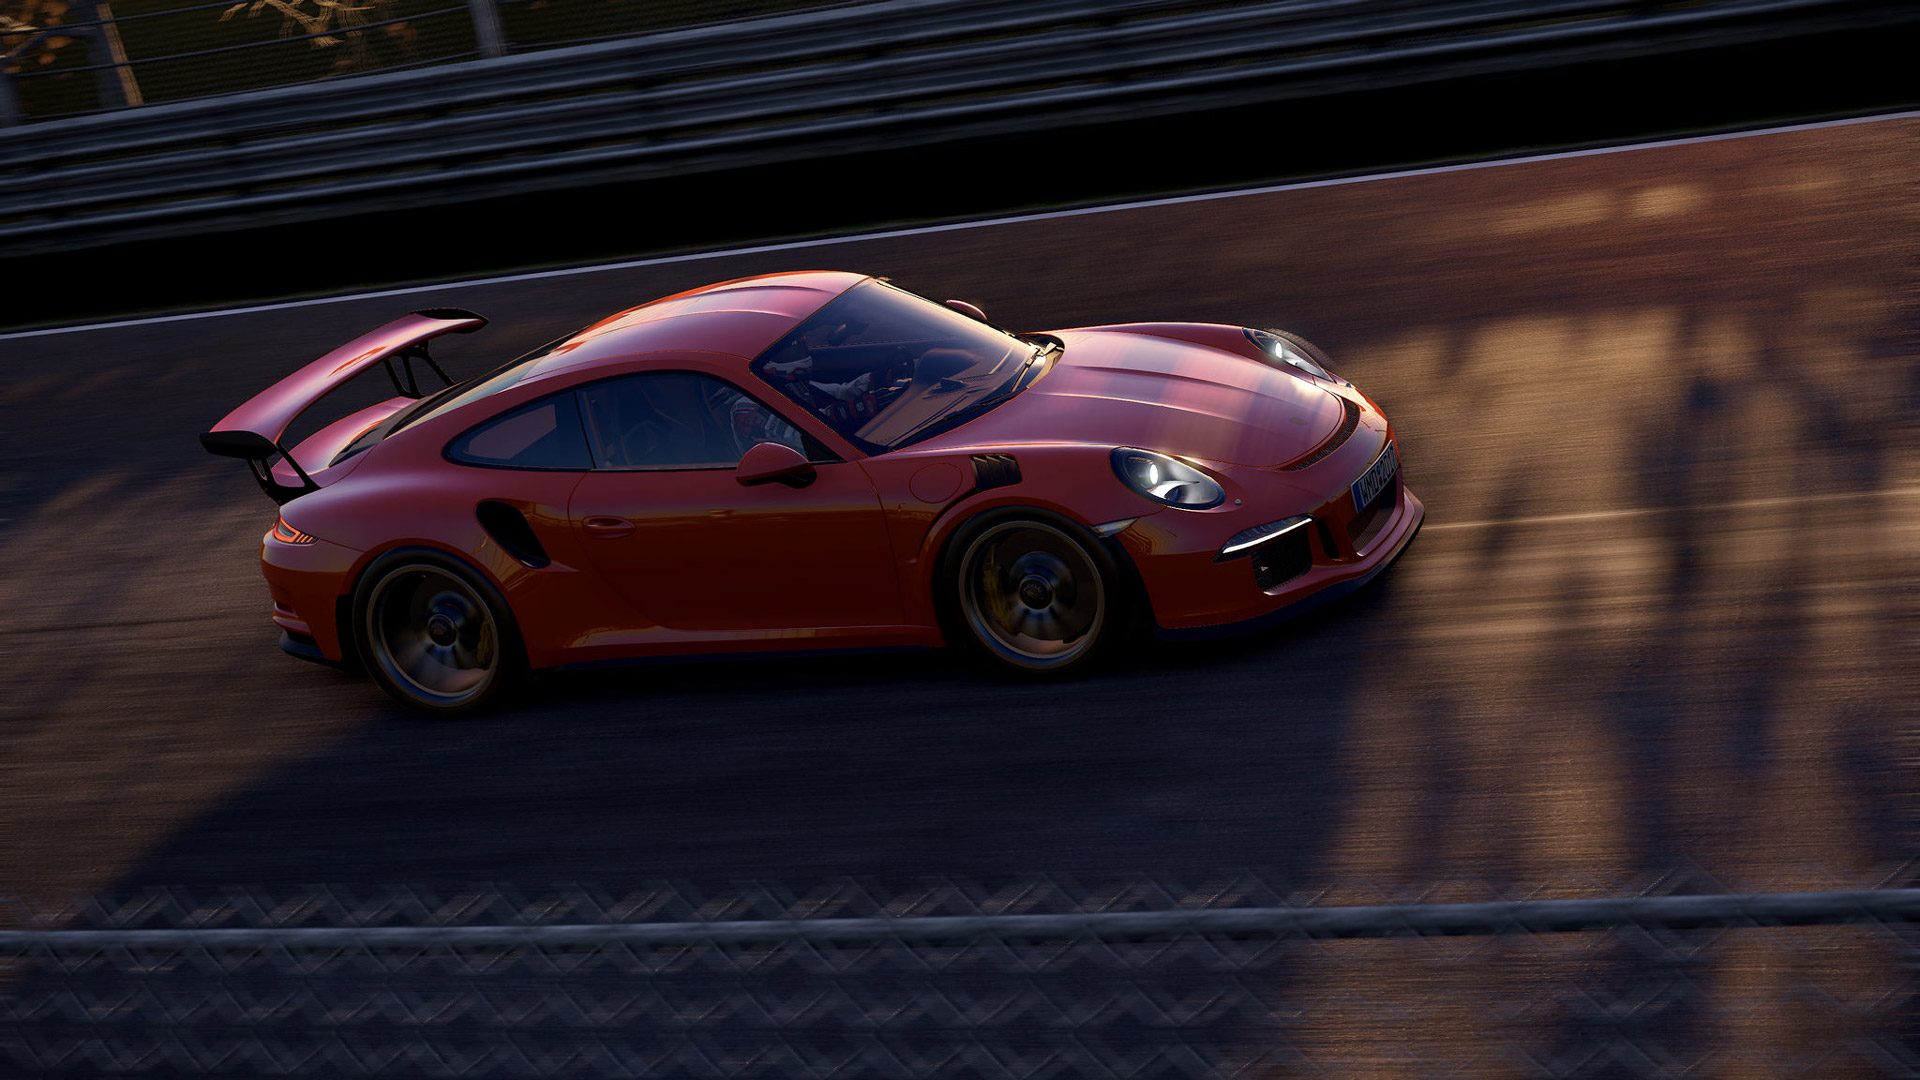 Project CARS 2 Hands-On Preview - 12K, Full VR Support and e-Sports